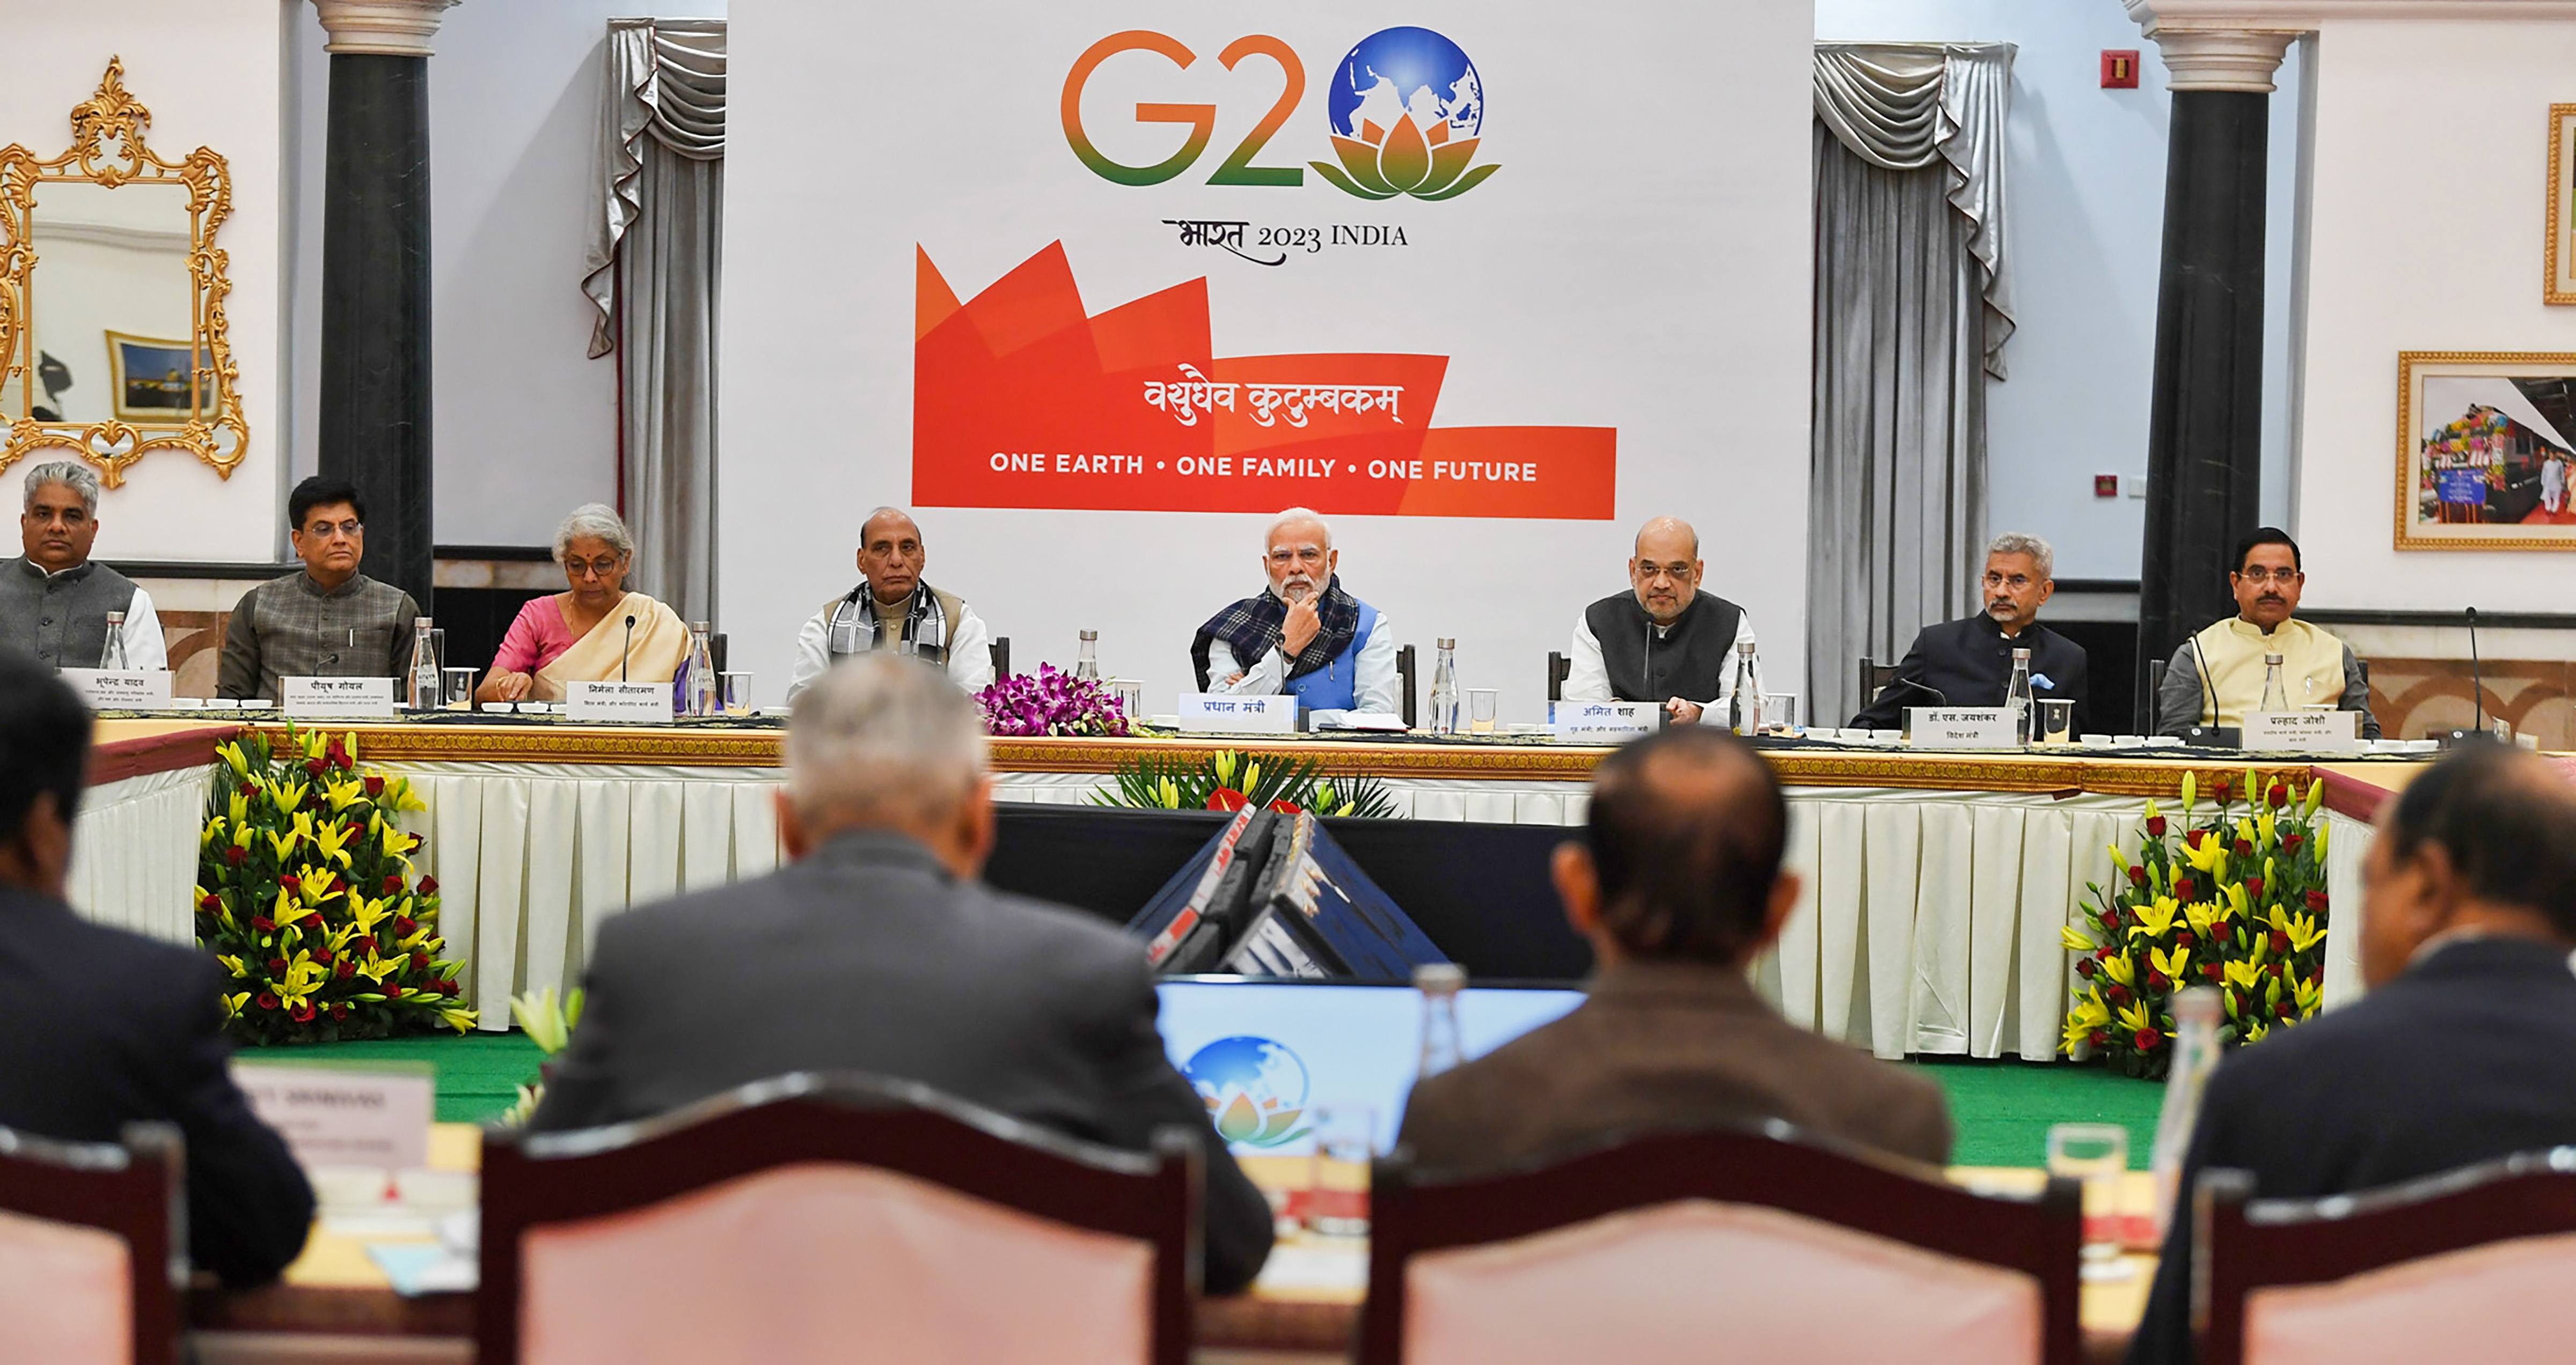 In BJP meet, PM Modi urges party to showcase G20 events under India’s